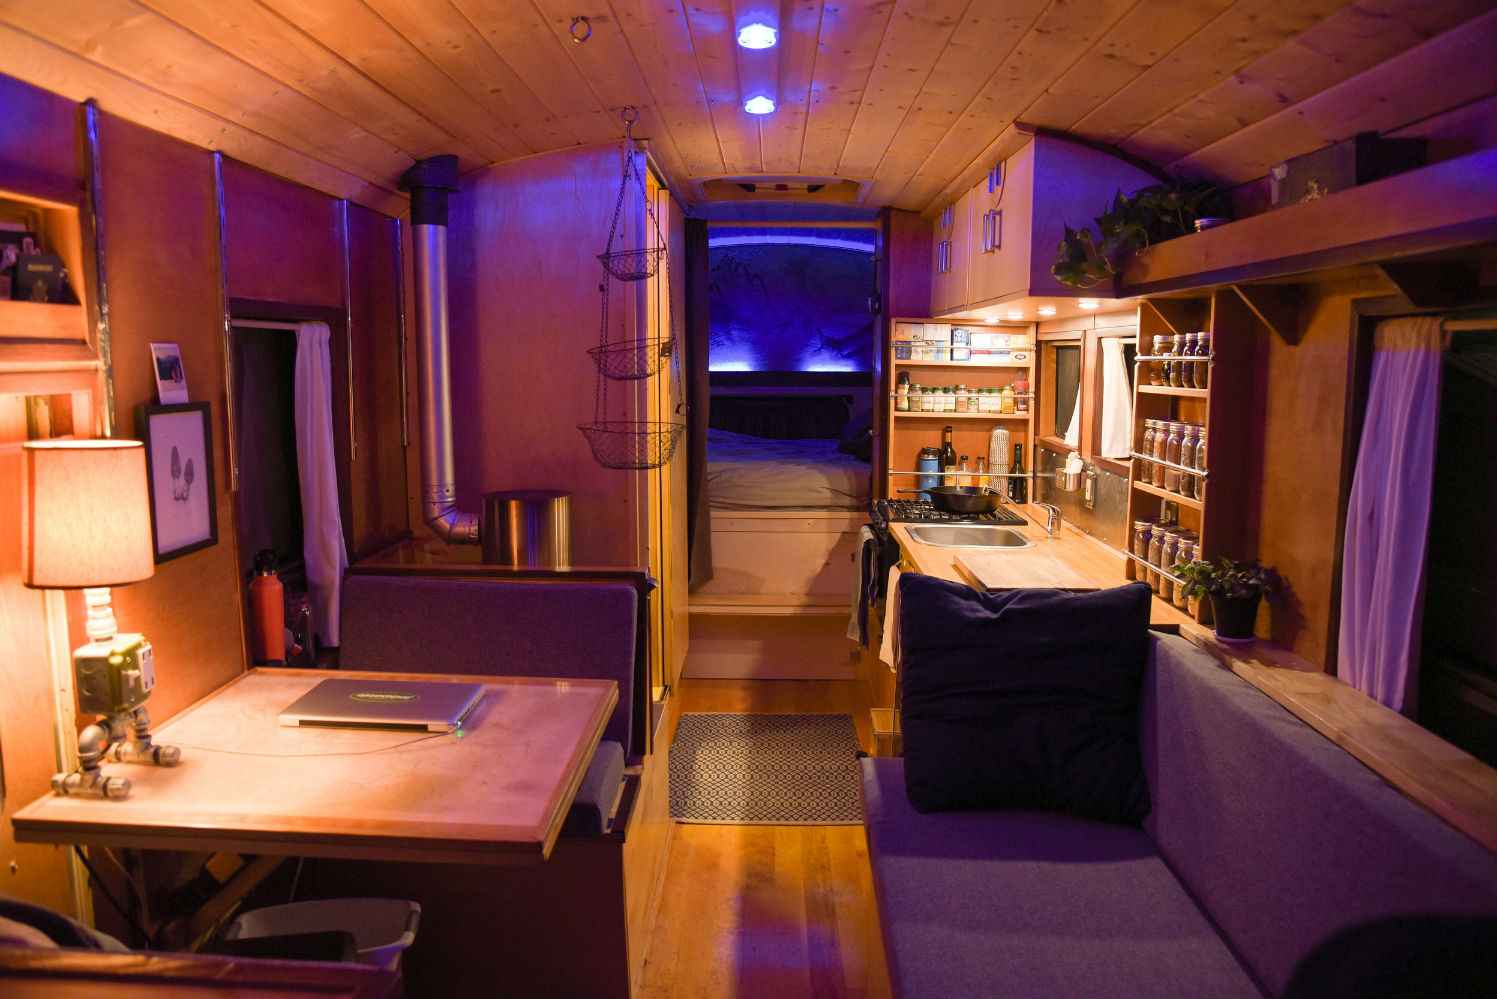 coolest bus to mobile home conversions kylevolkmaninside